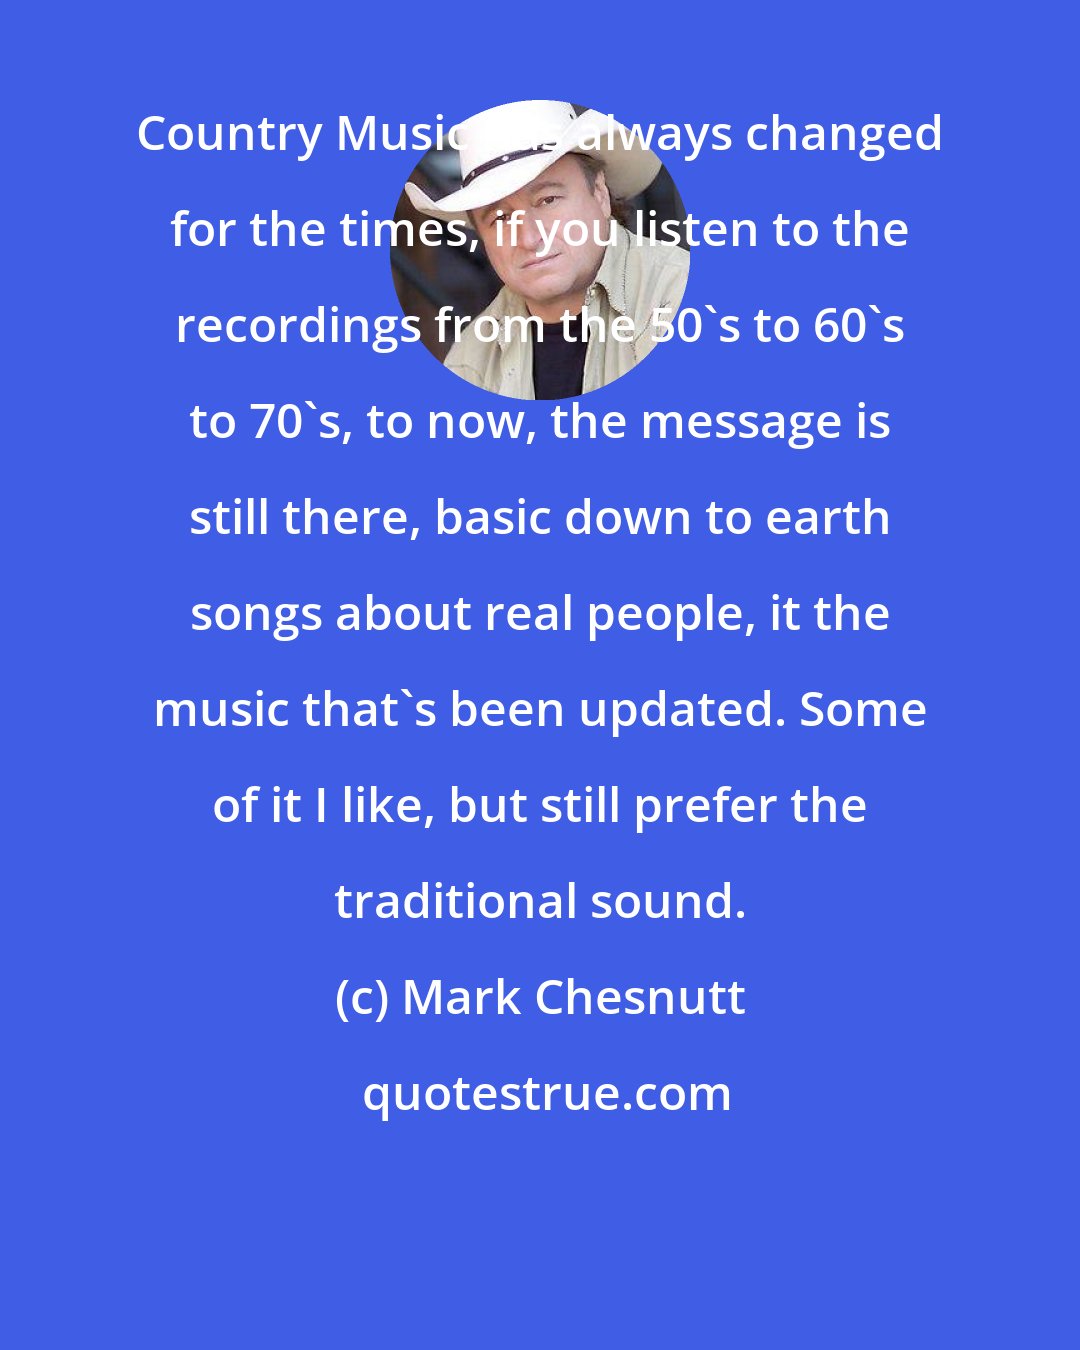 Mark Chesnutt: Country Music has always changed for the times, if you listen to the recordings from the 50's to 60's to 70's, to now, the message is still there, basic down to earth songs about real people, it the music that's been updated. Some of it I like, but still prefer the traditional sound.